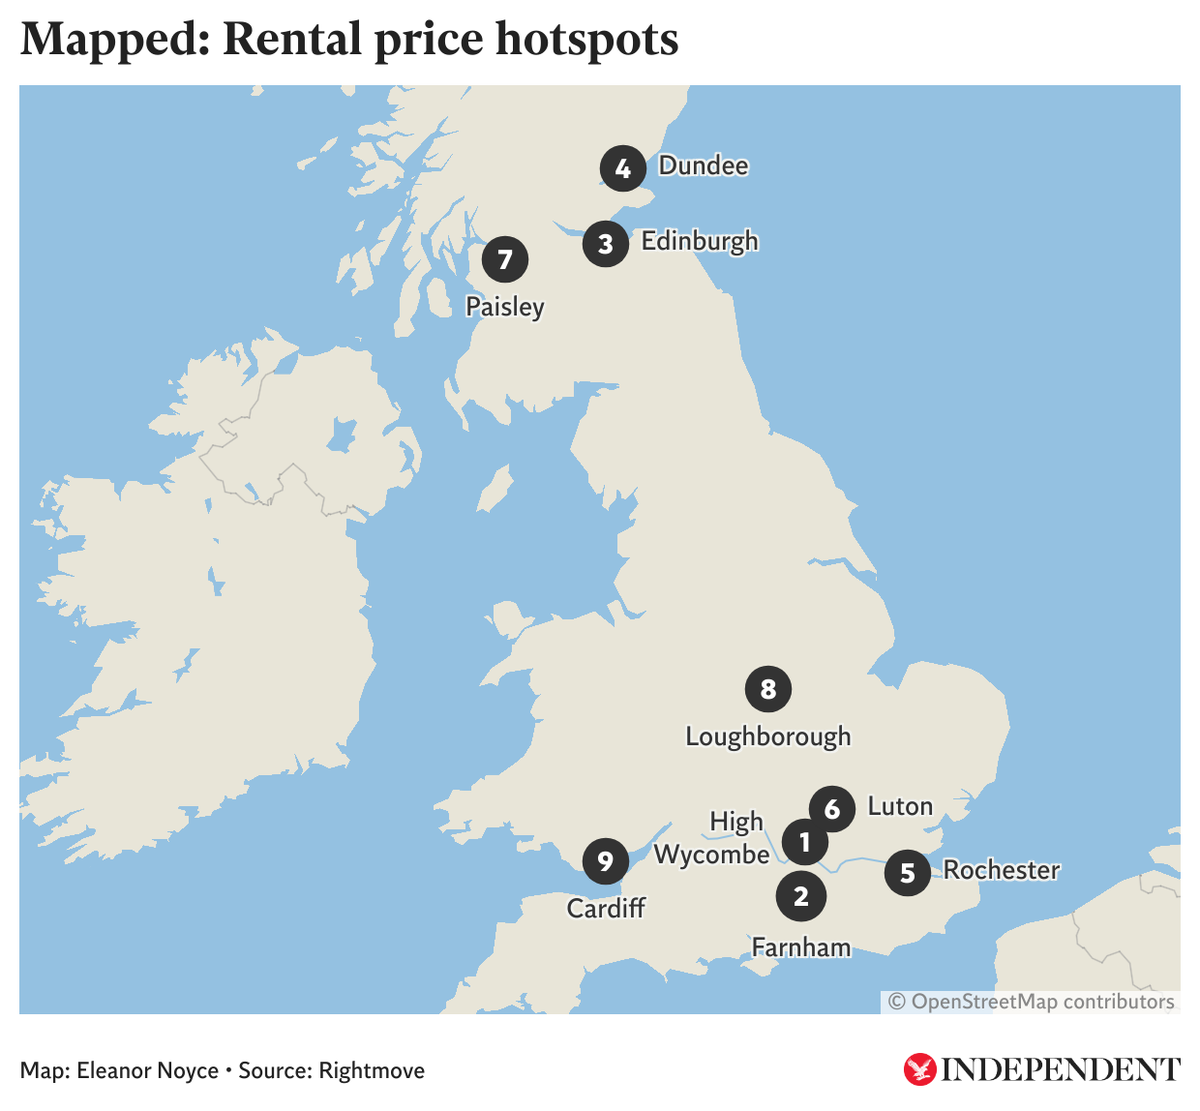 Mapped: Rental price hotspots with the largest annual increases (The Independent/Datawrapper)